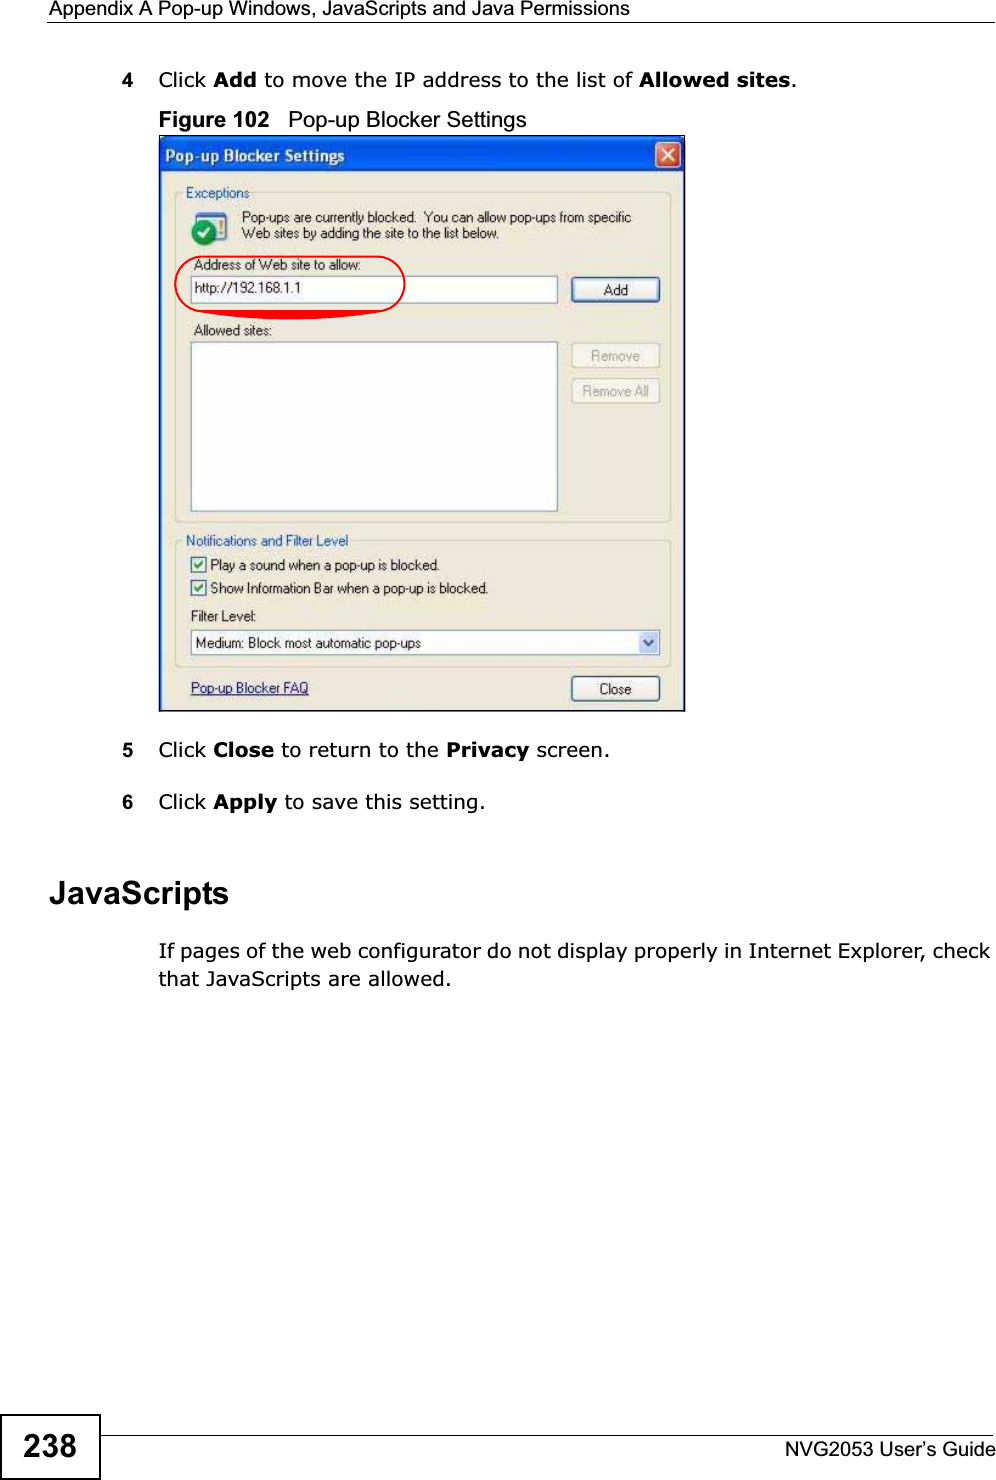 Appendix A Pop-up Windows, JavaScripts and Java PermissionsNVG2053 User’s Guide2384Click Add to move the IP address to the list of Allowed sites.Figure 102   Pop-up Blocker Settings5Click Close to return to the Privacy screen. 6Click Apply to save this setting. JavaScriptsIf pages of the web configurator do not display properly in Internet Explorer, check that JavaScripts are allowed. 